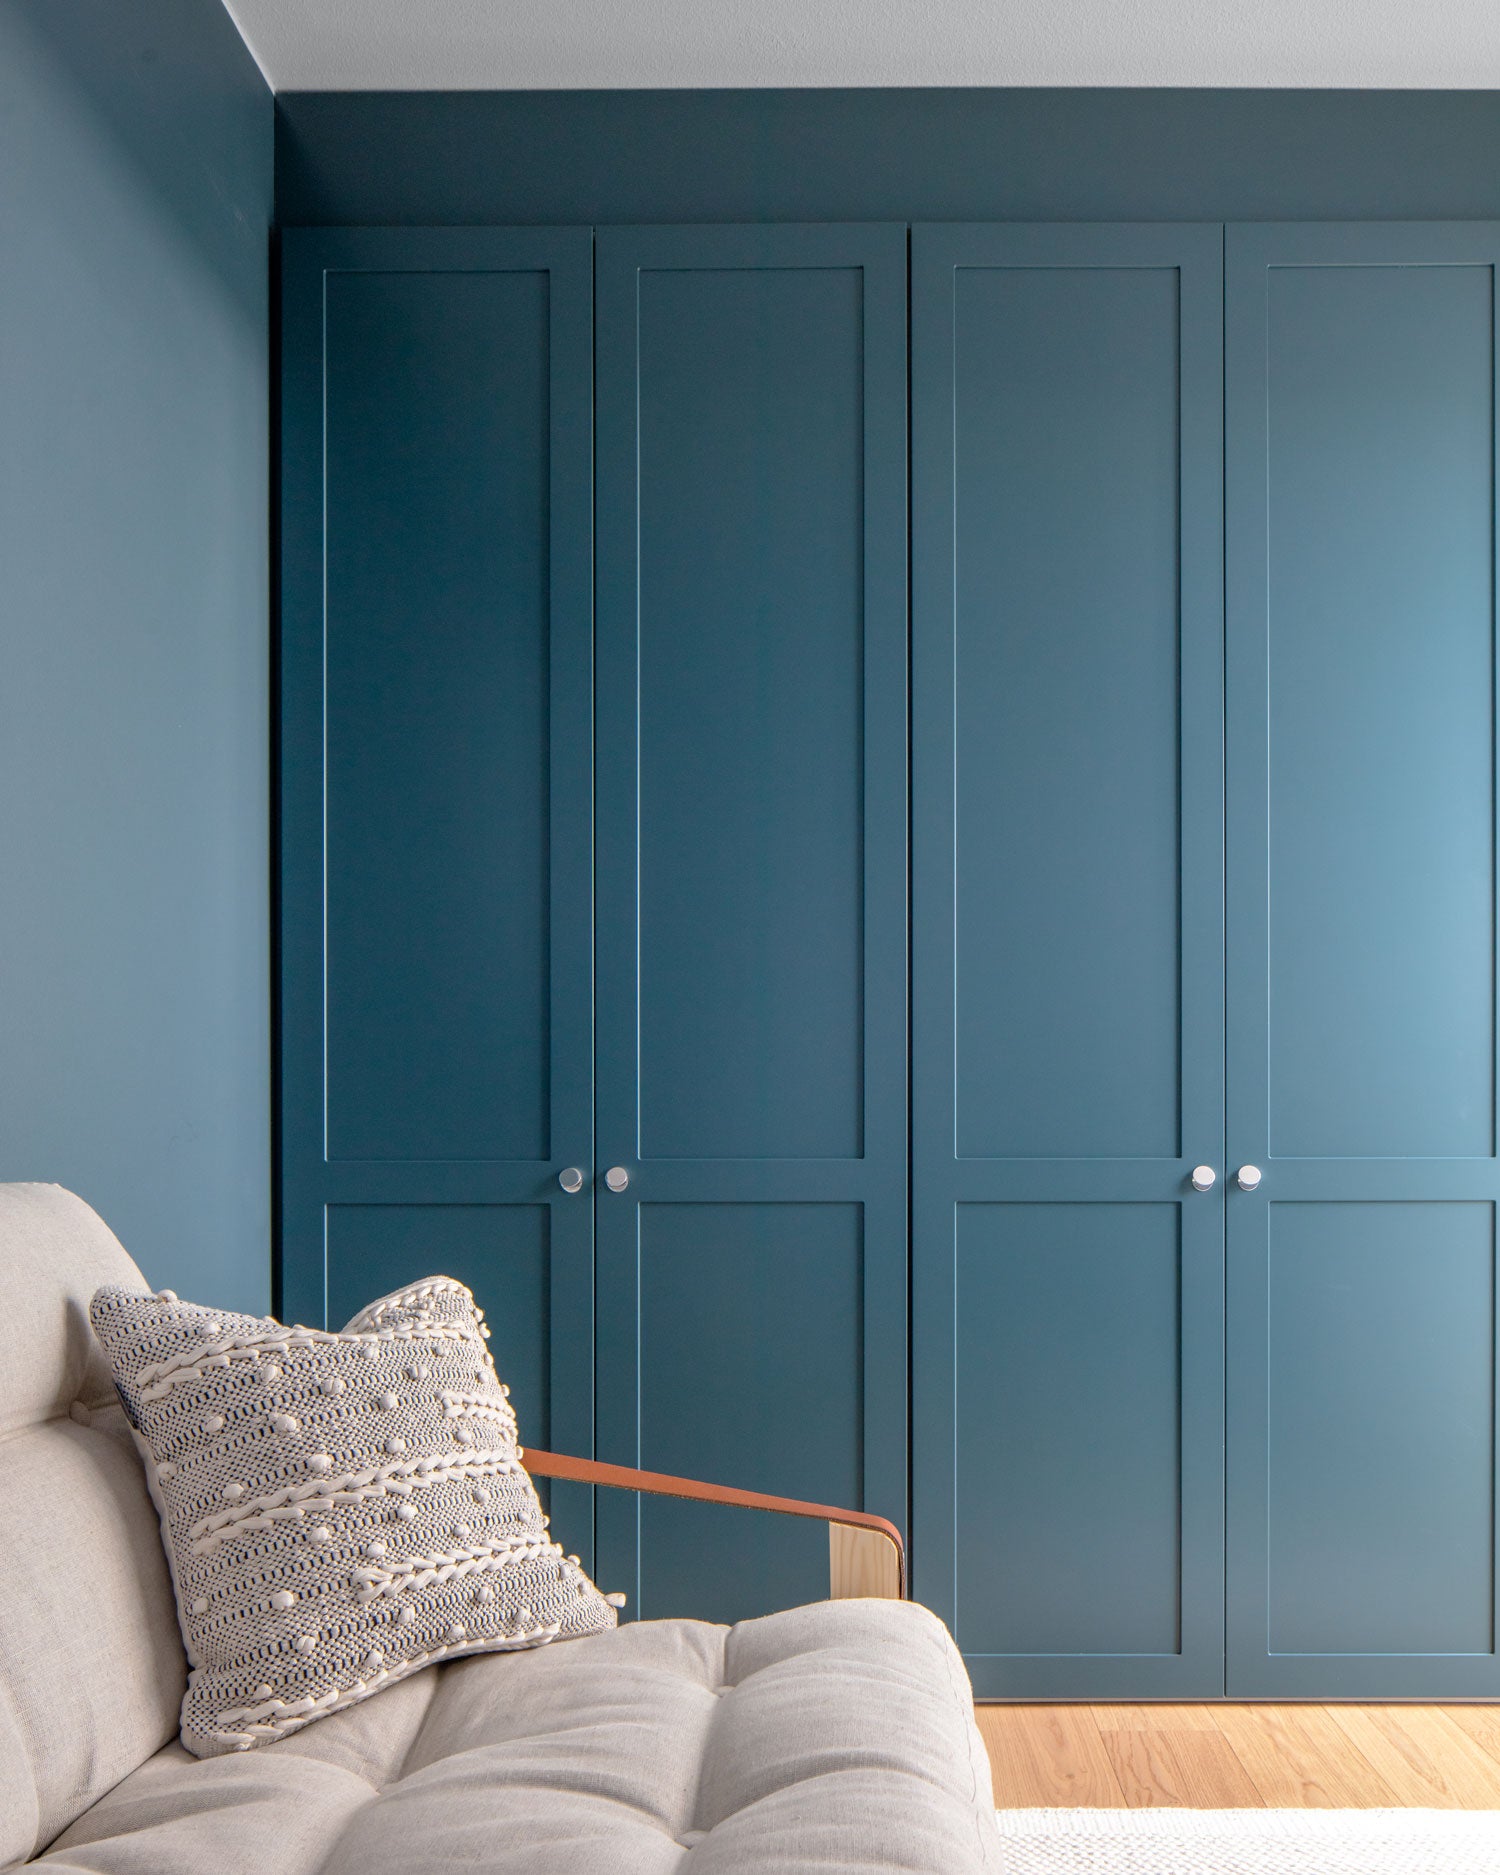 A.S.Helsingö wardrobe and Milieu interior wall paint in petrol blue color